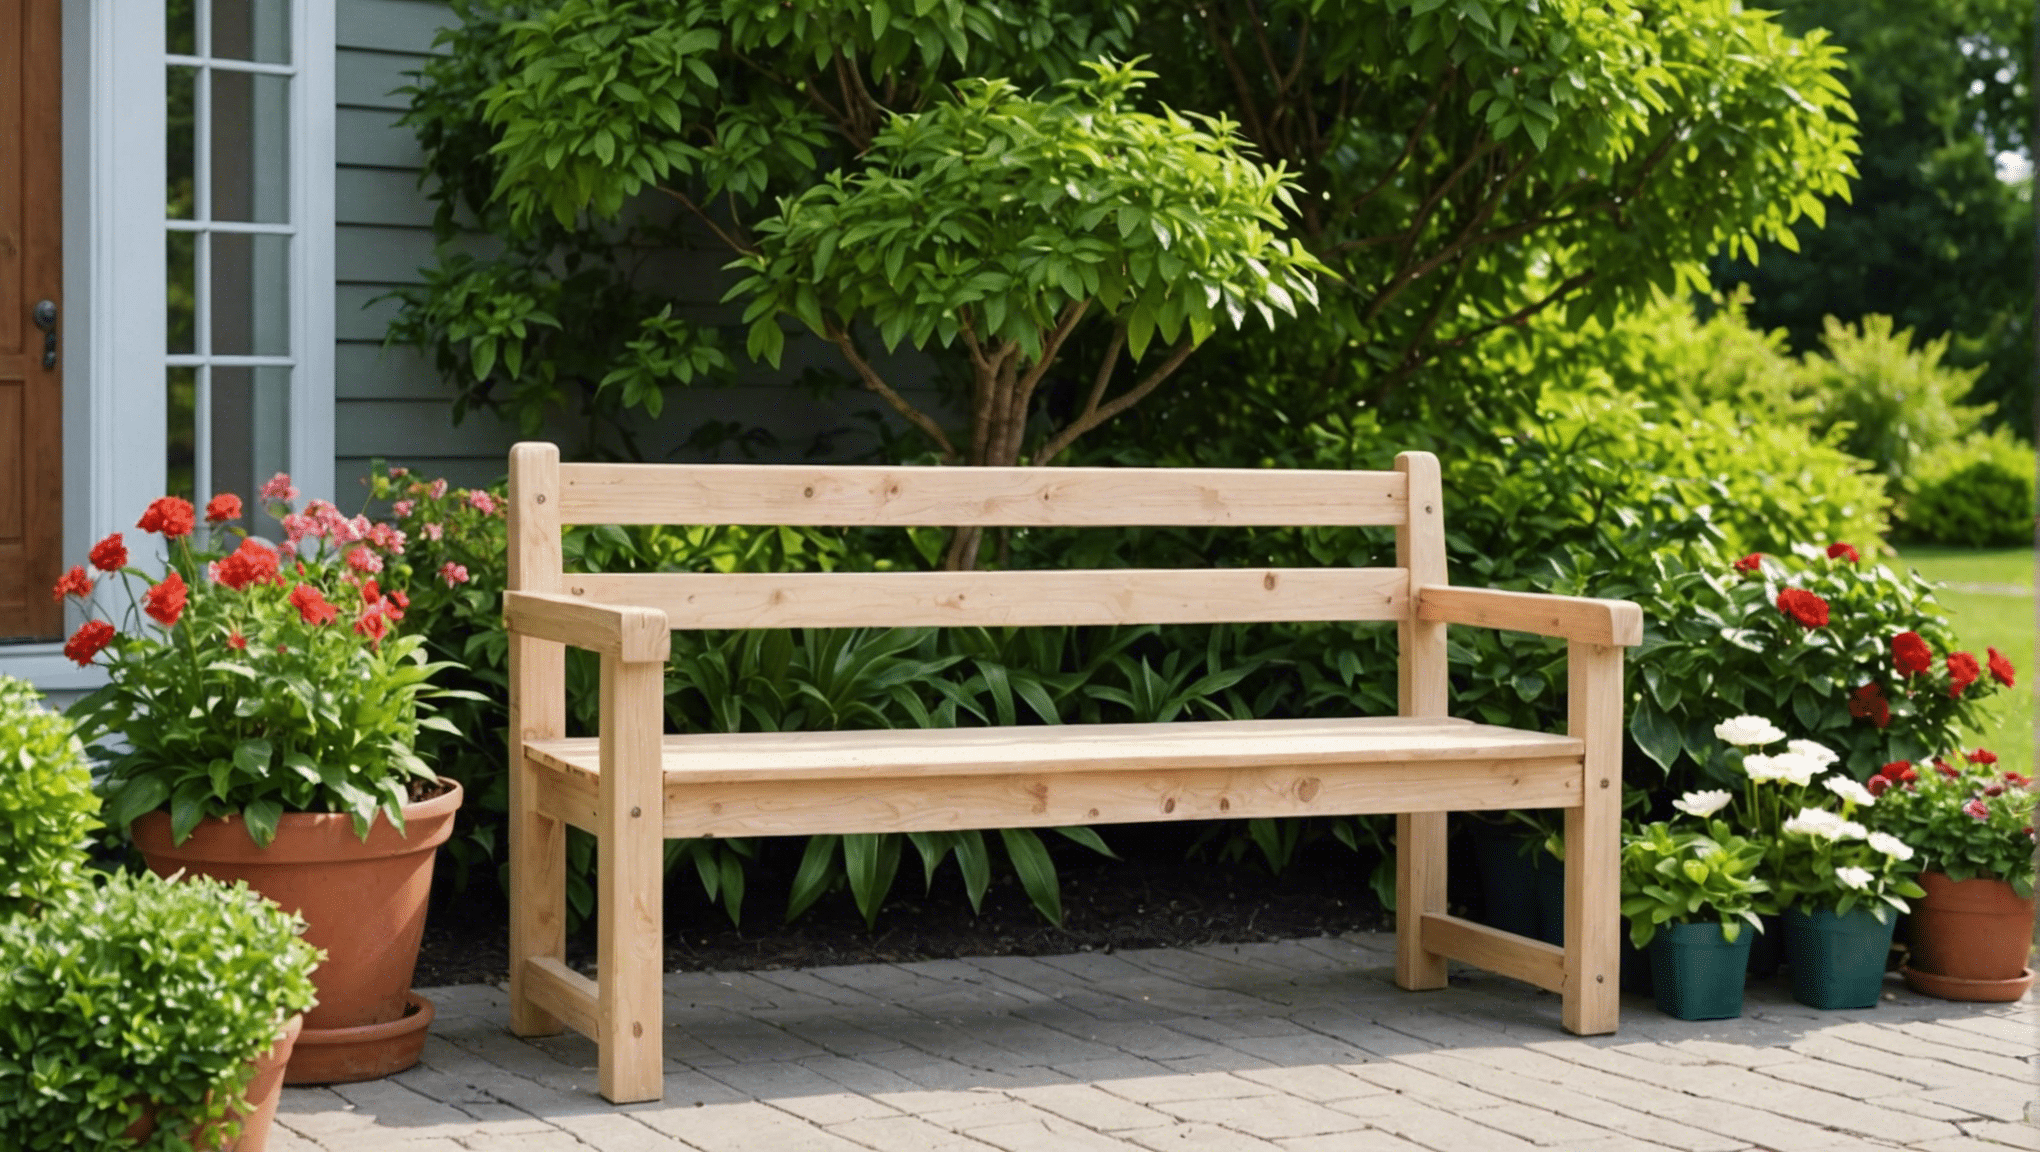 discover unique and creative gardening bench ideas to elevate your outdoor space with our inspiring collection of designs and diy projects.